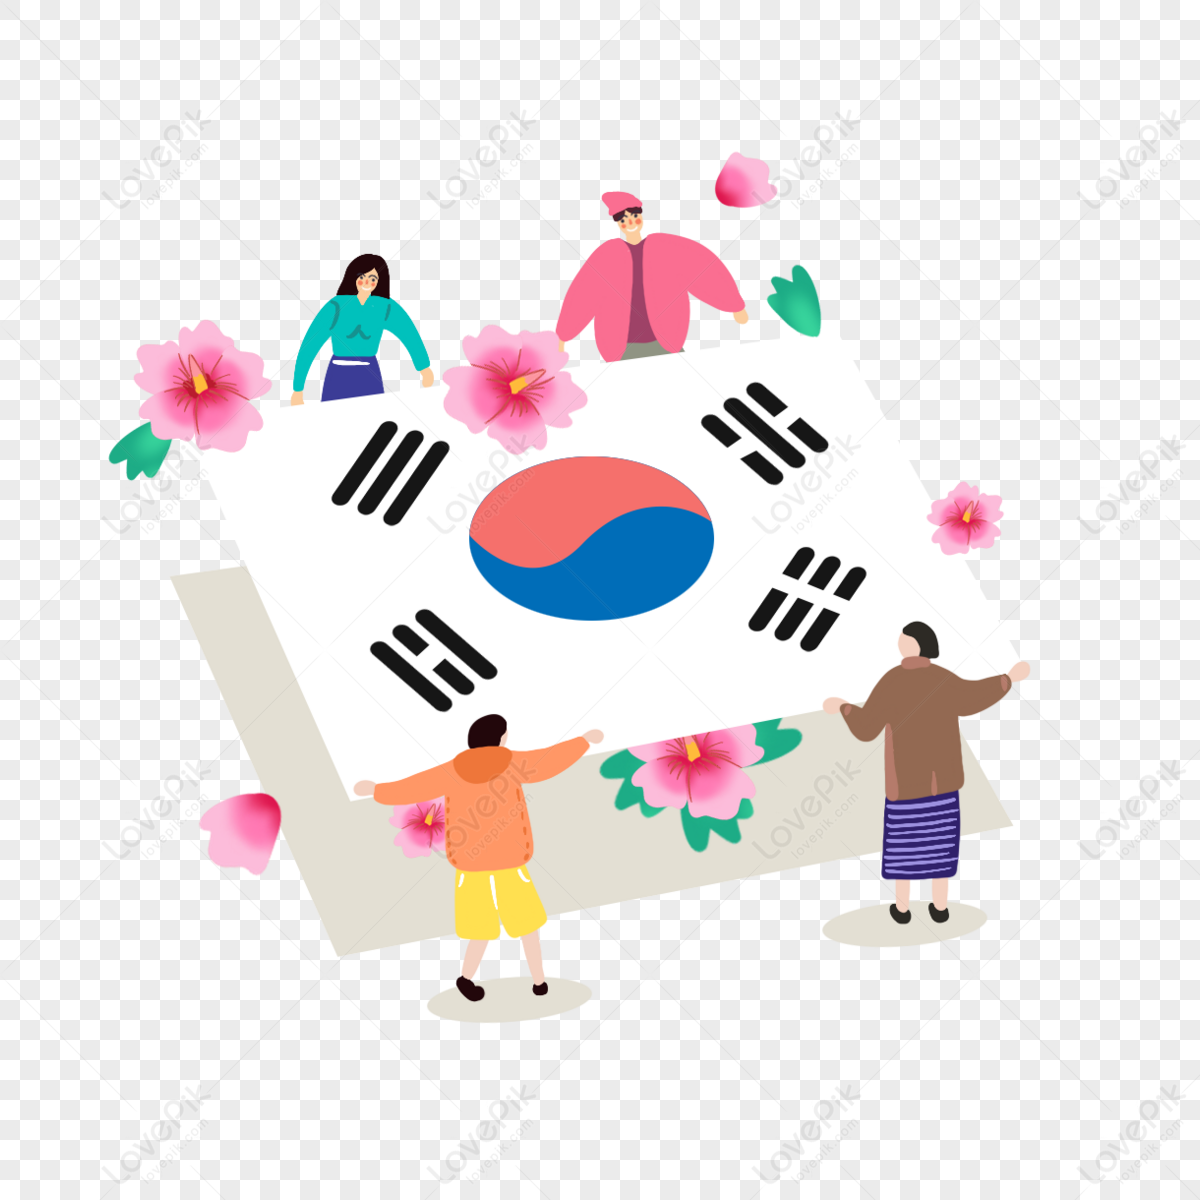 Hand drawn South Korea flag parade illustration,festival,hibiscus flowers png free download